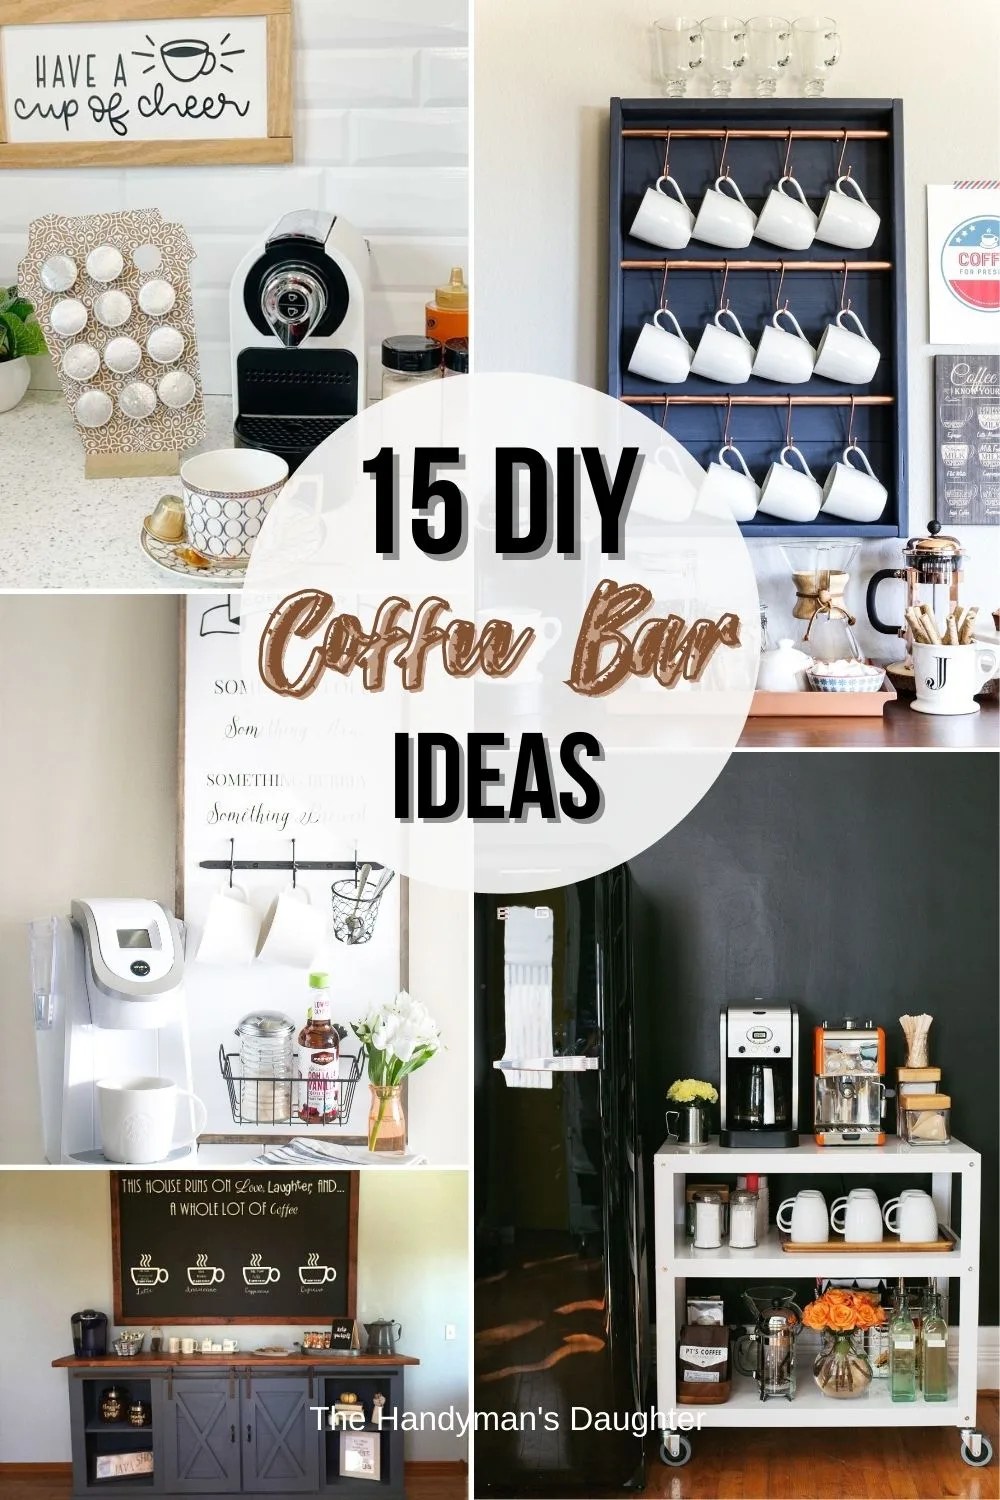 How to Create Your own Coffee bar at Home